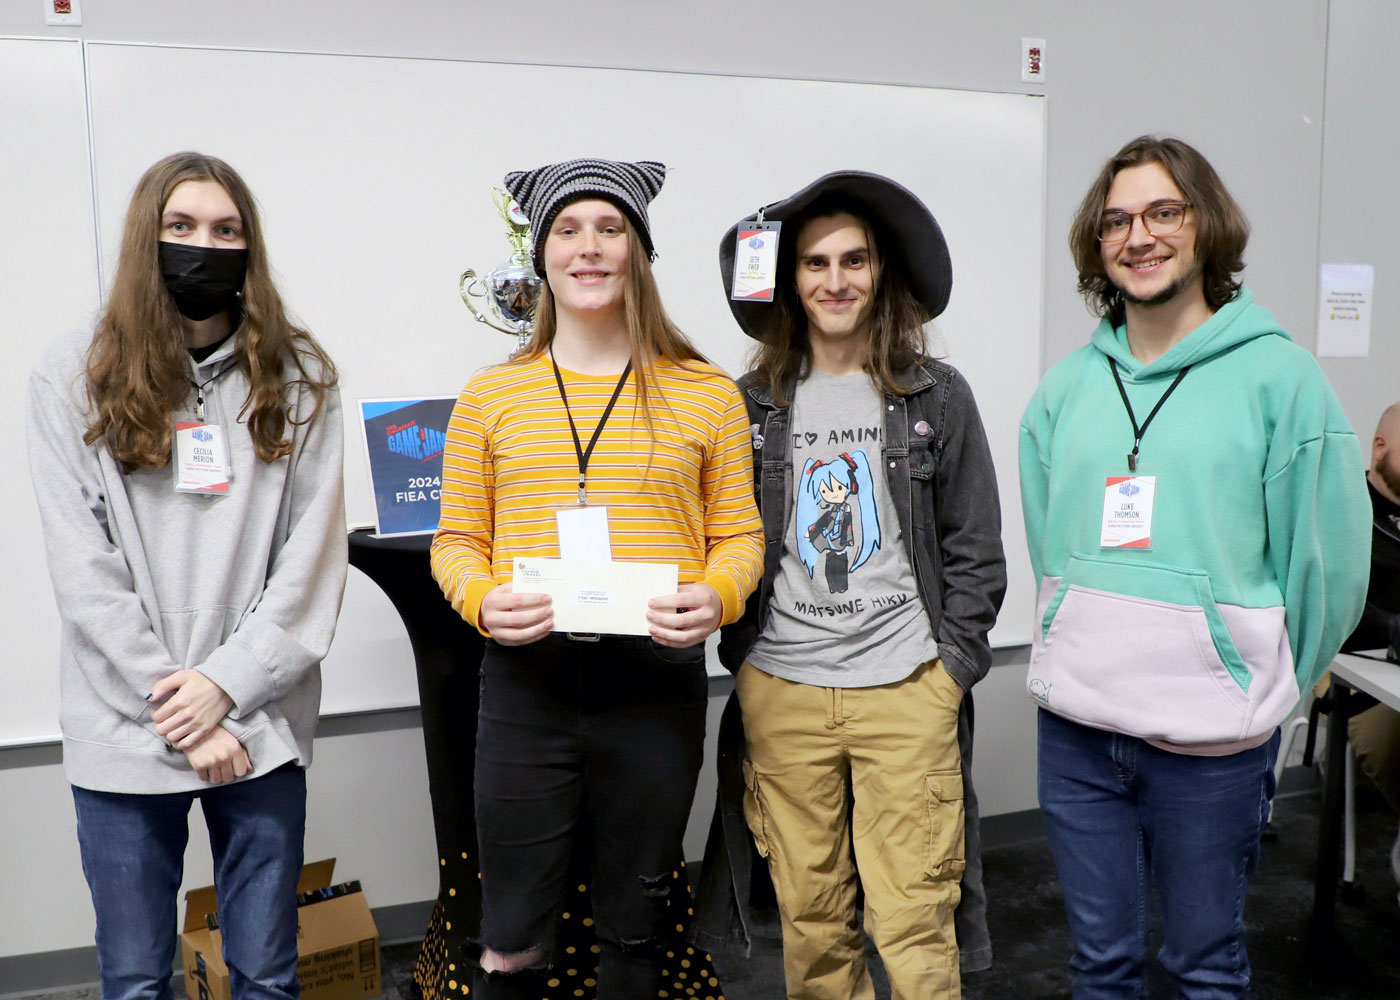 Florida Poly second-place game jam winners